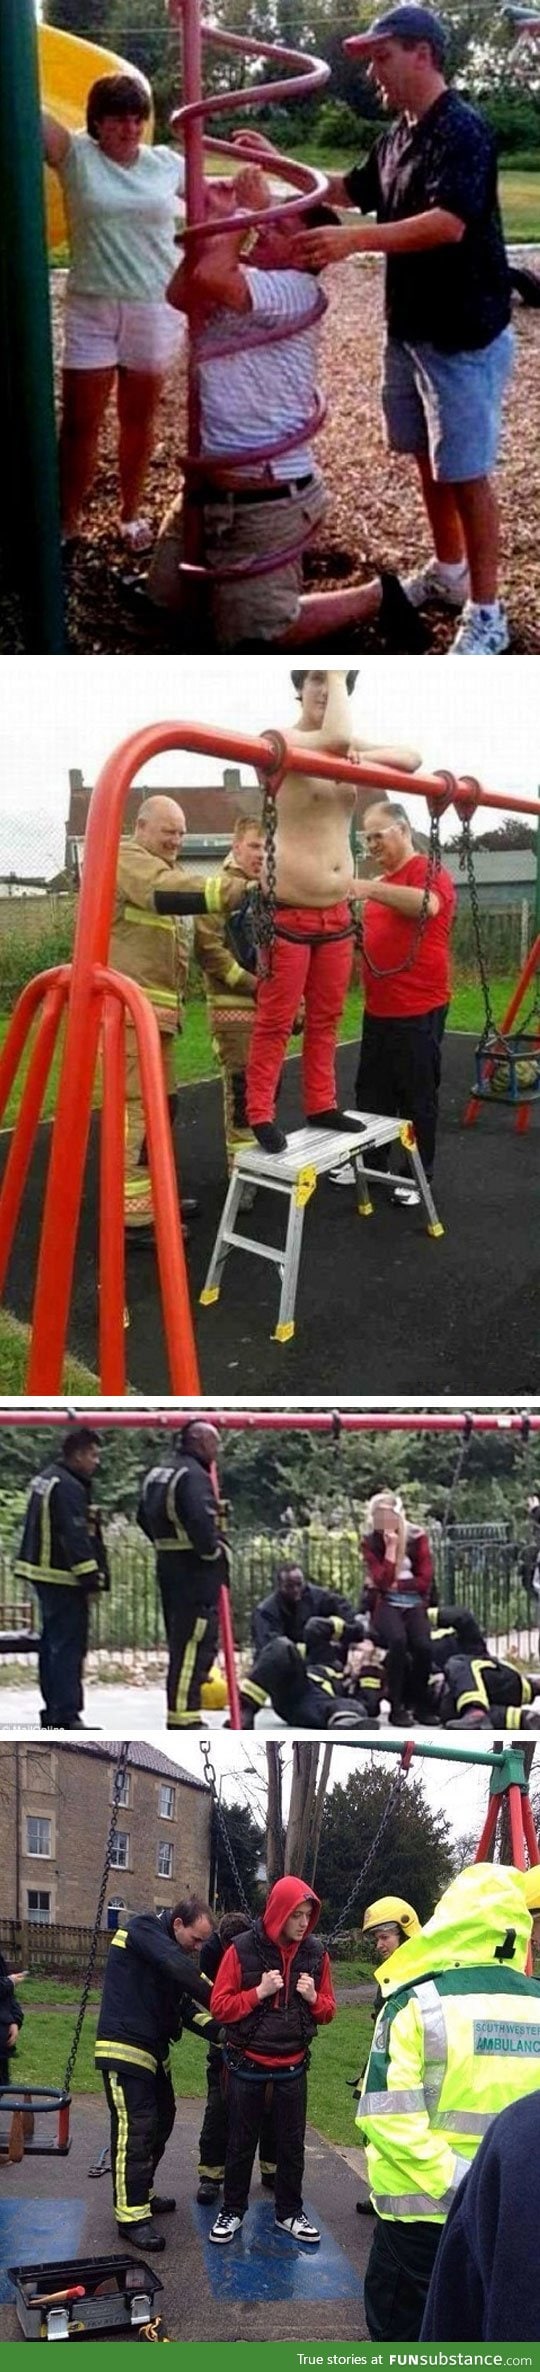 Adults stuck in playground equipment